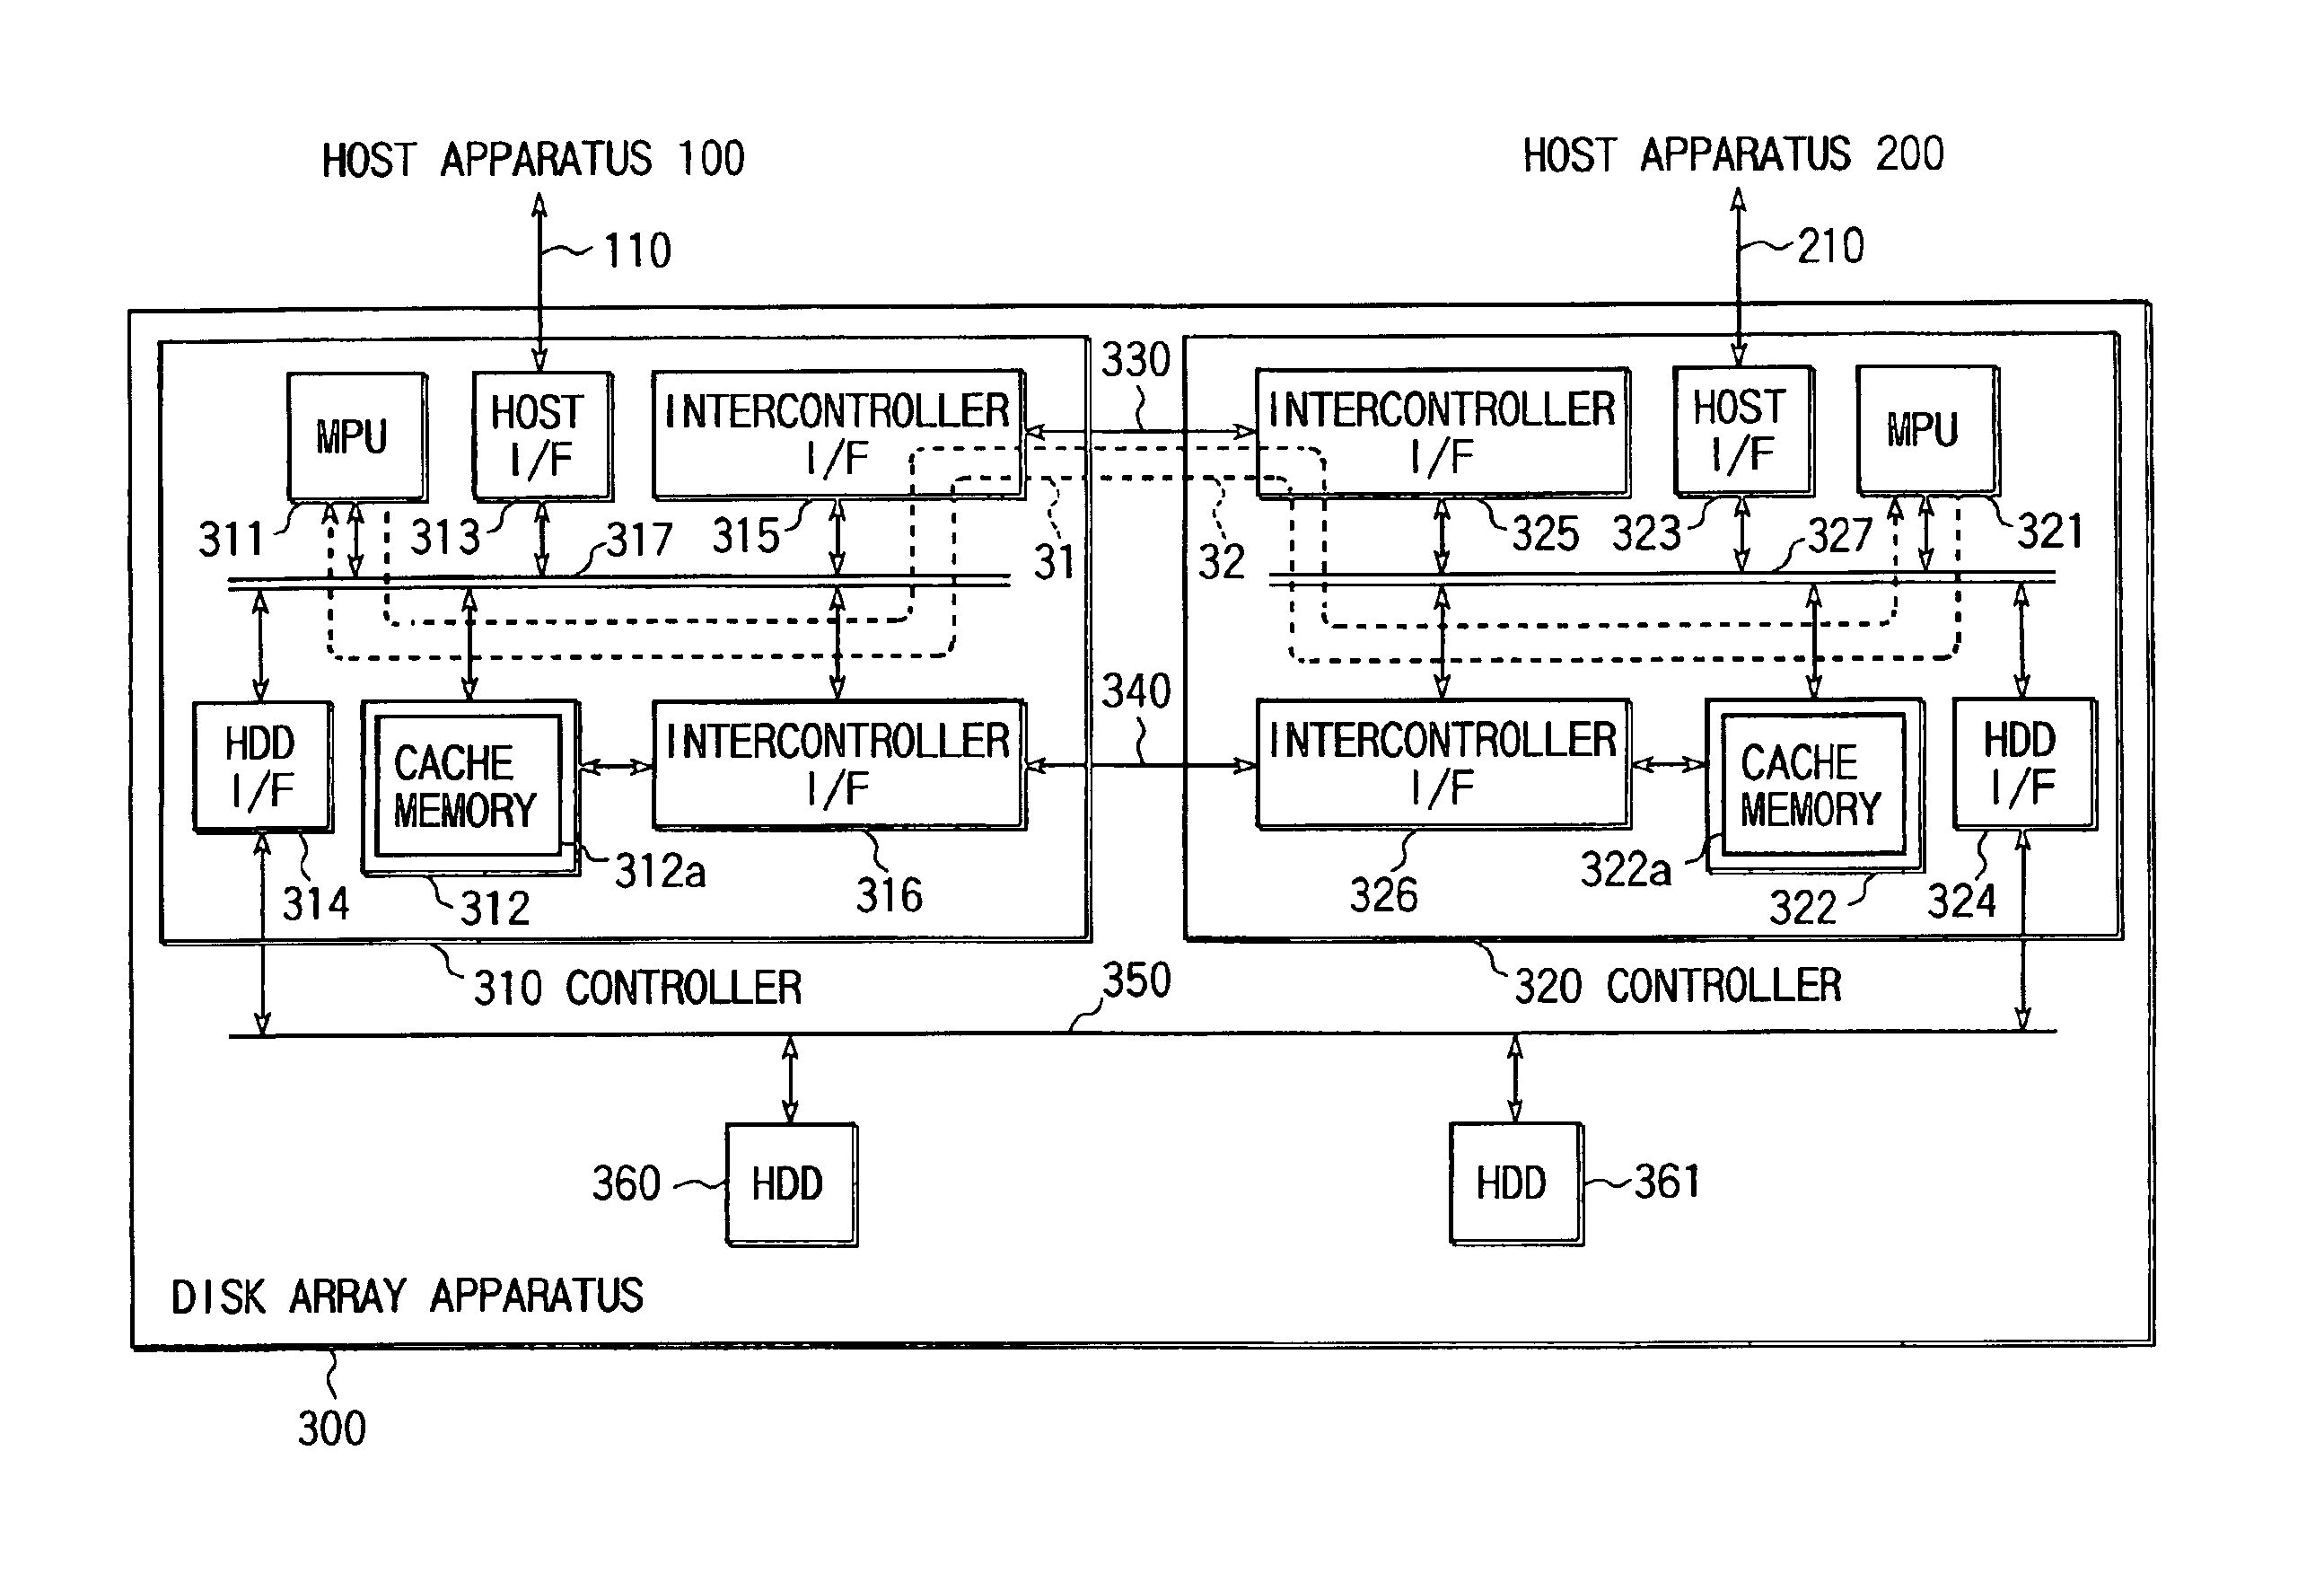 System for selectively using different communication paths to transfer data between controllers in a disk array in accordance with data transfer size